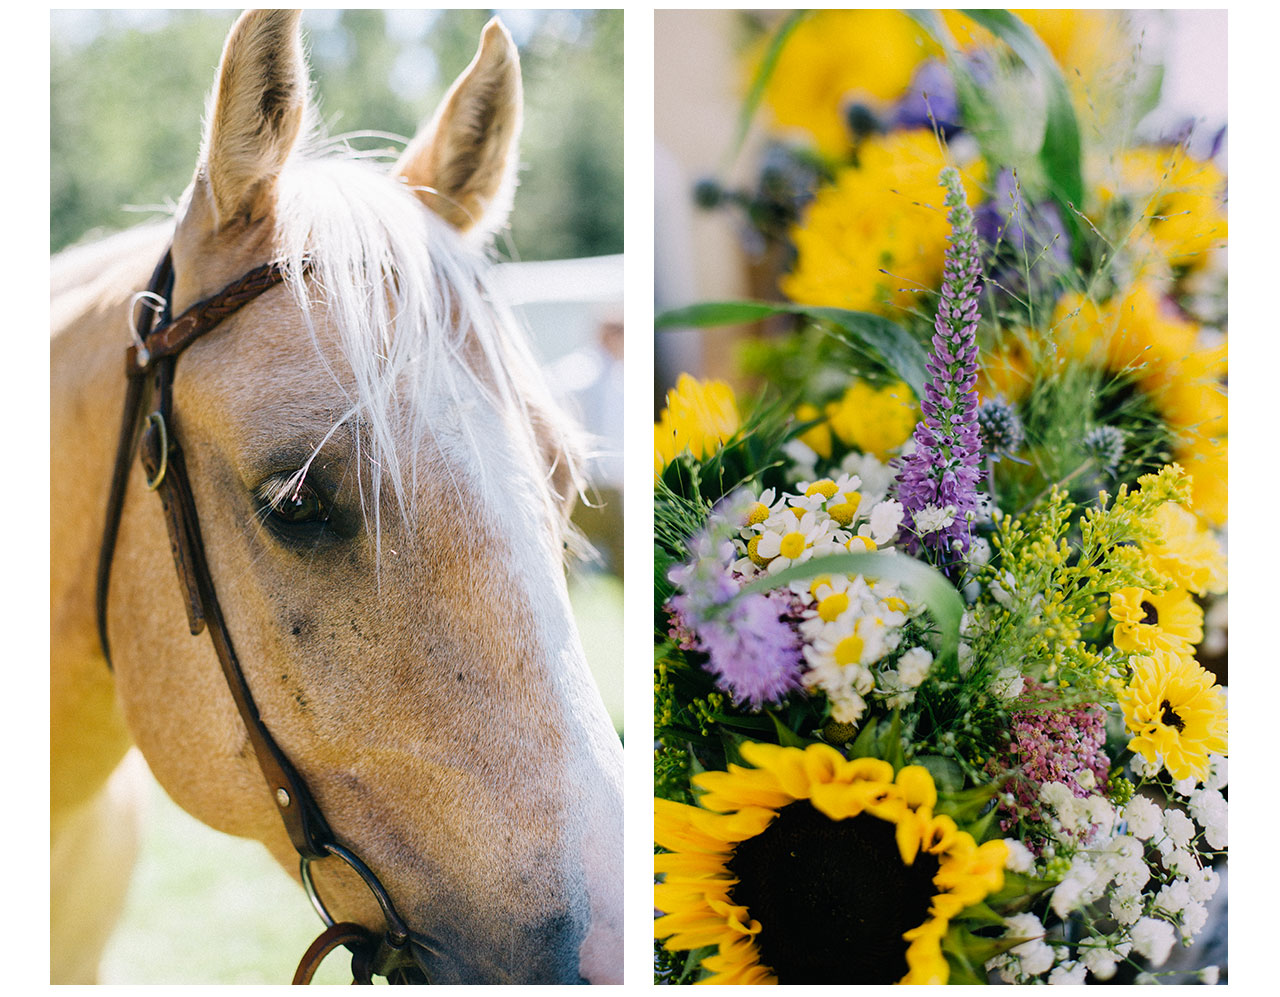 Horse and bouquet/wedding details